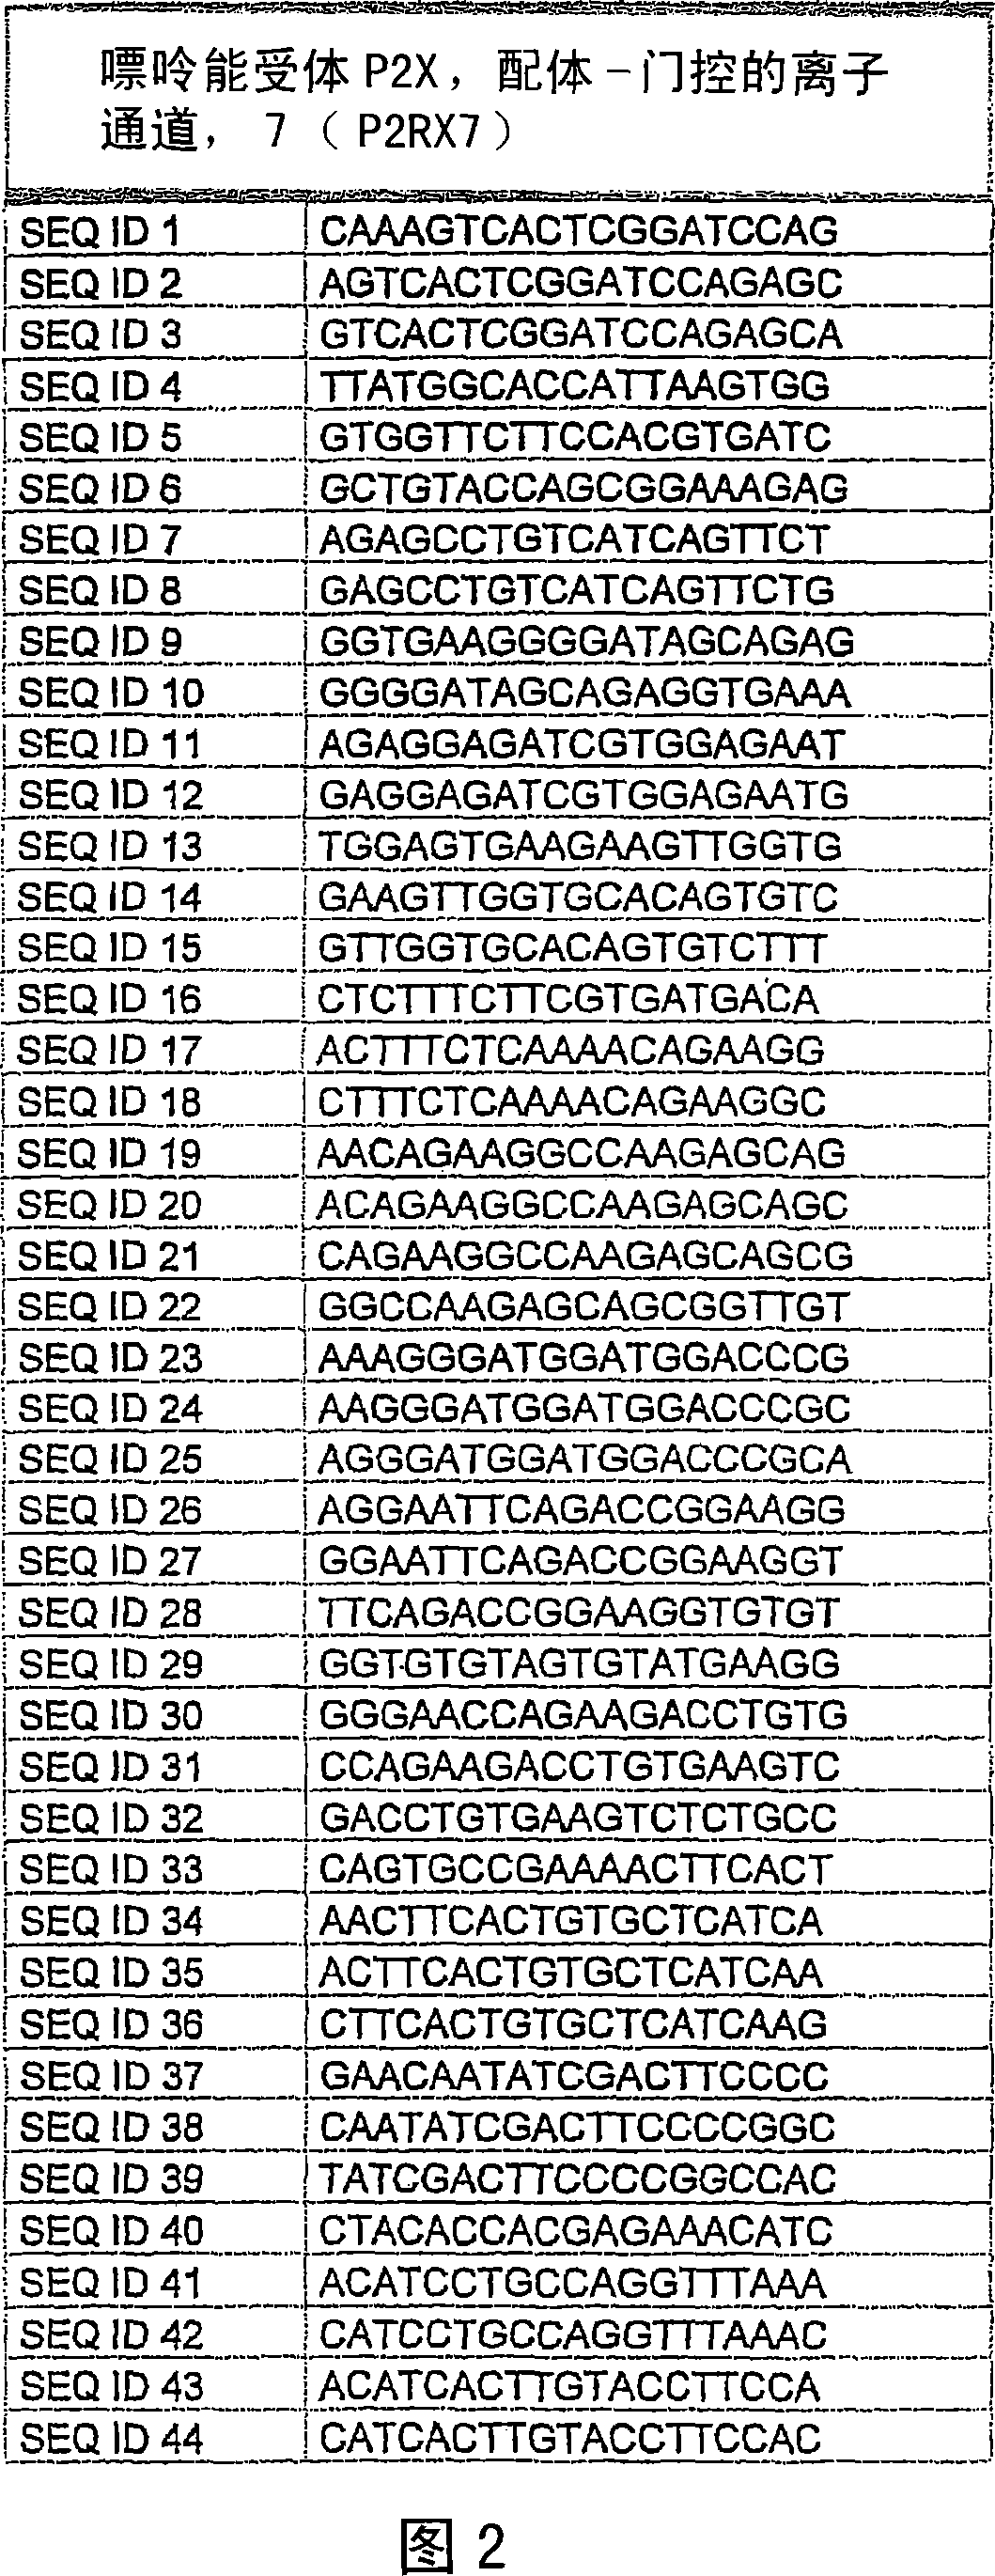 Methods and compositions to inhibit p2x7 receptor expression